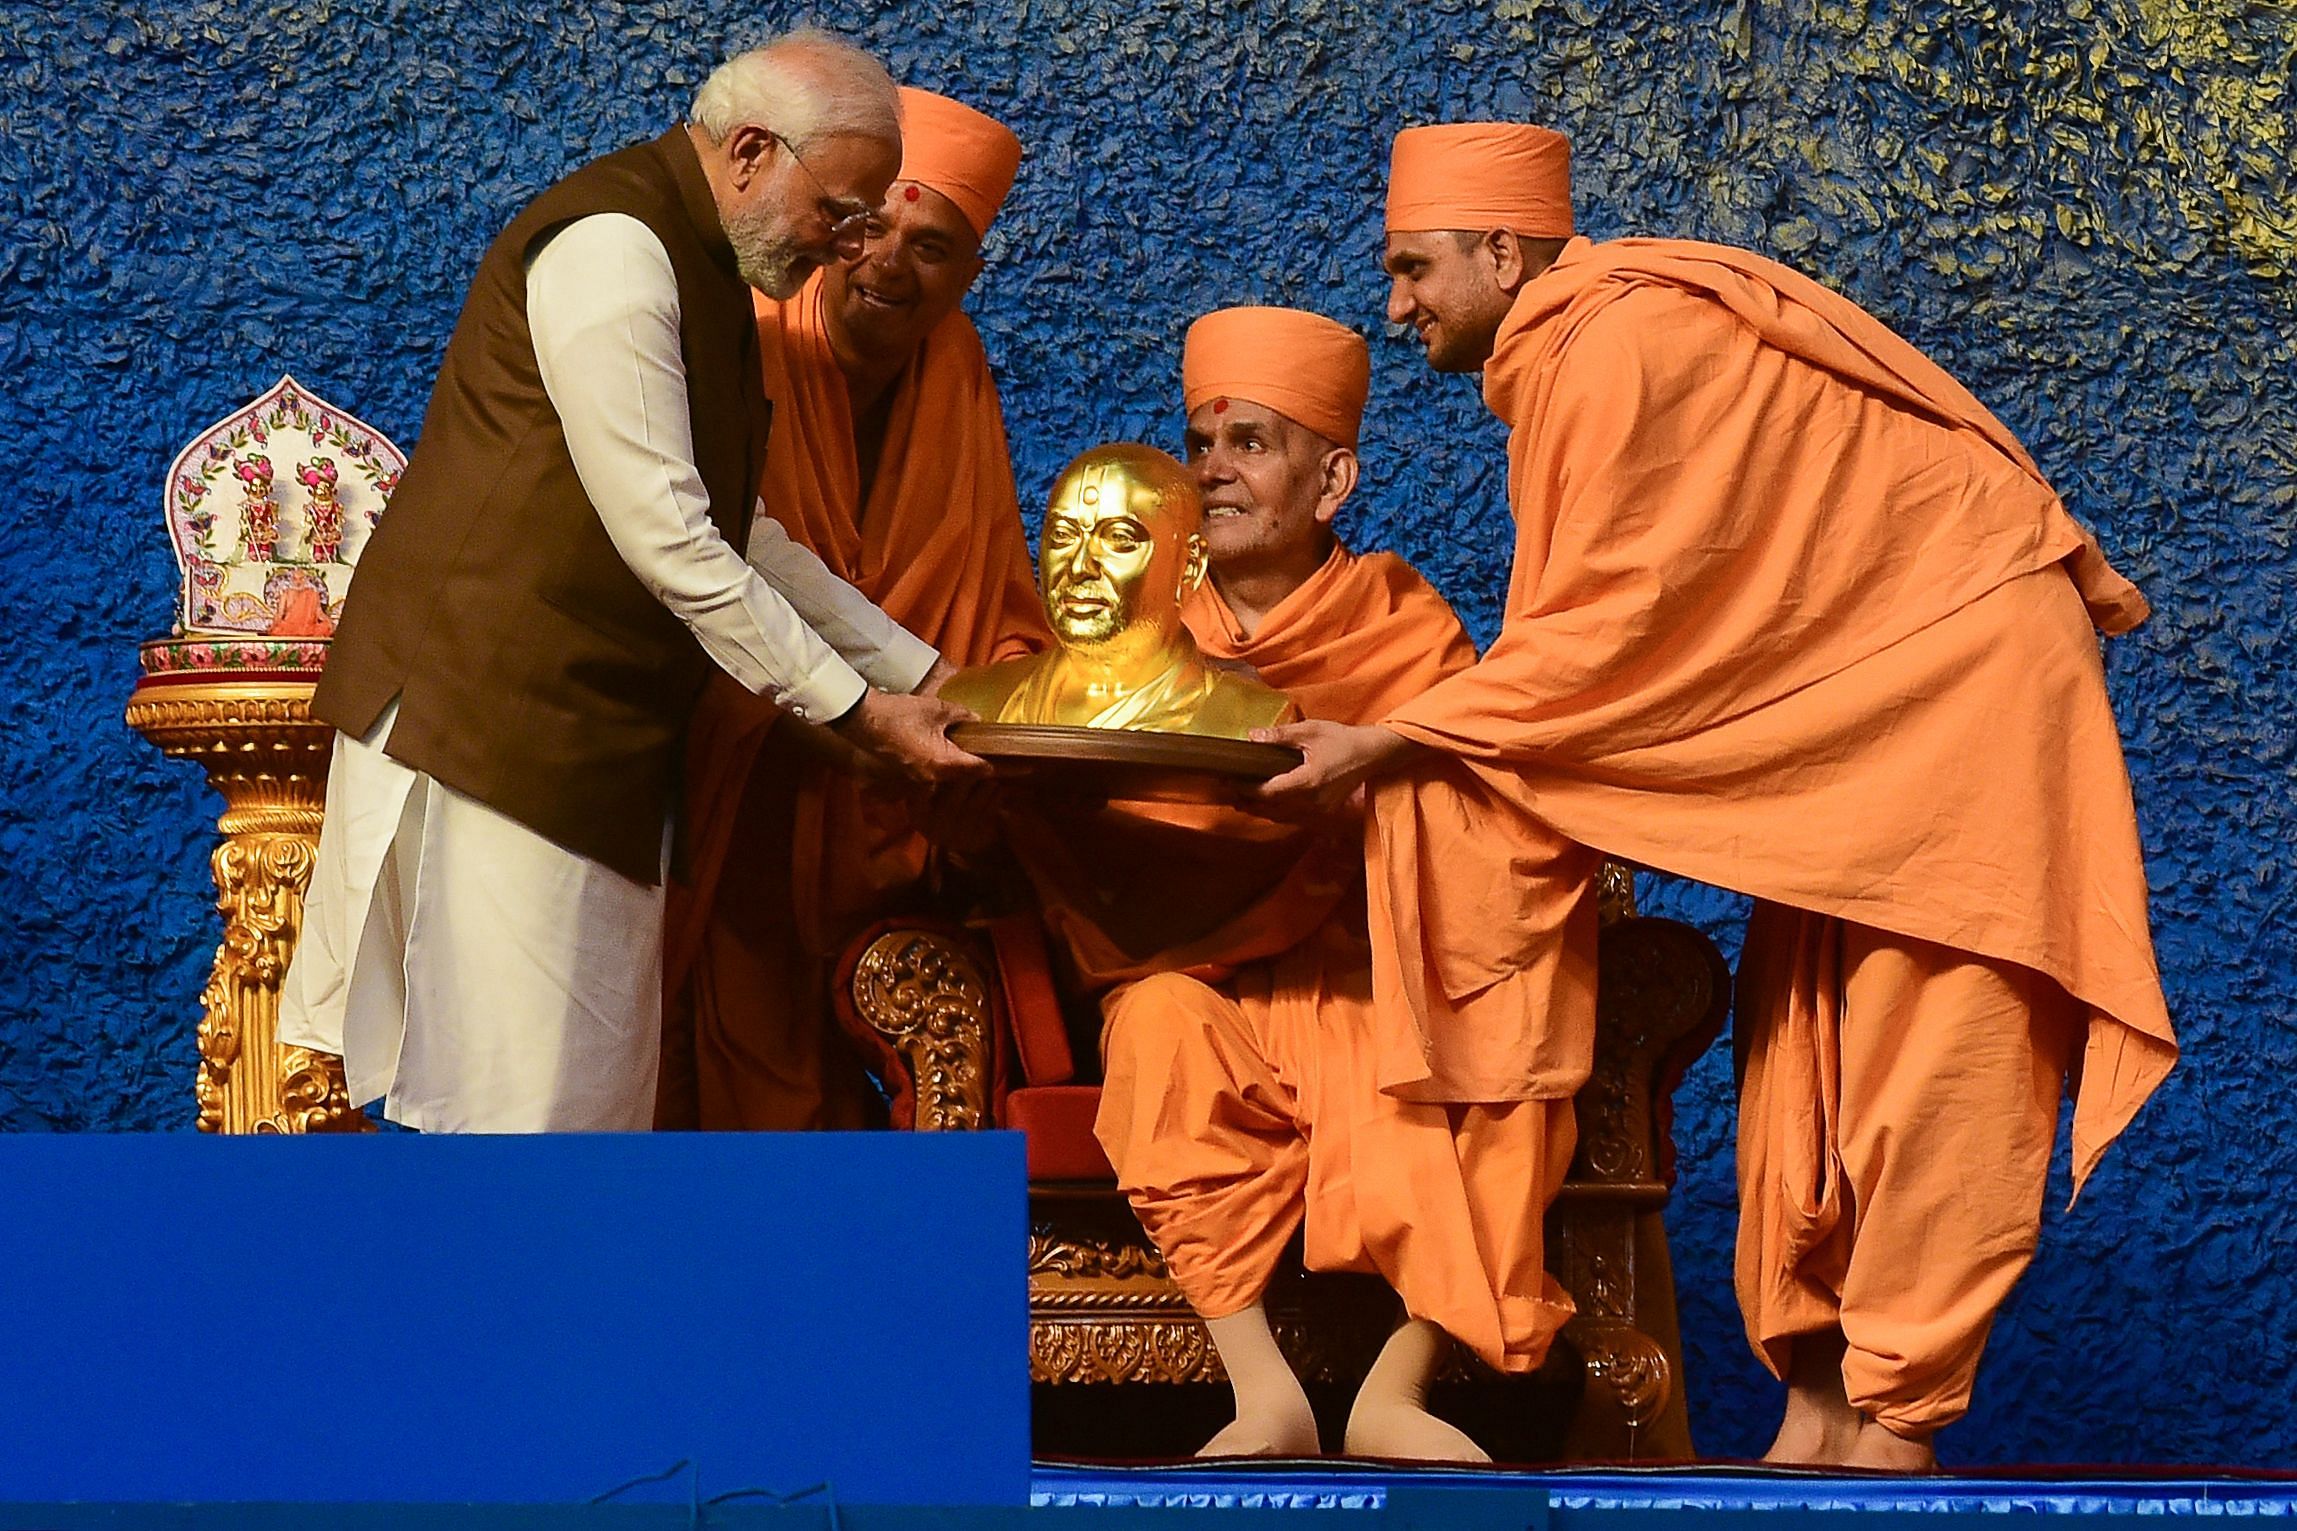 Prime Minister Narendra Modi (L) receives a bust of Pramukh Swami from BAPS Chief Mahant Swami during inauguration of the Pramukh Swami centenary celebrations. Credit: AFP Photo